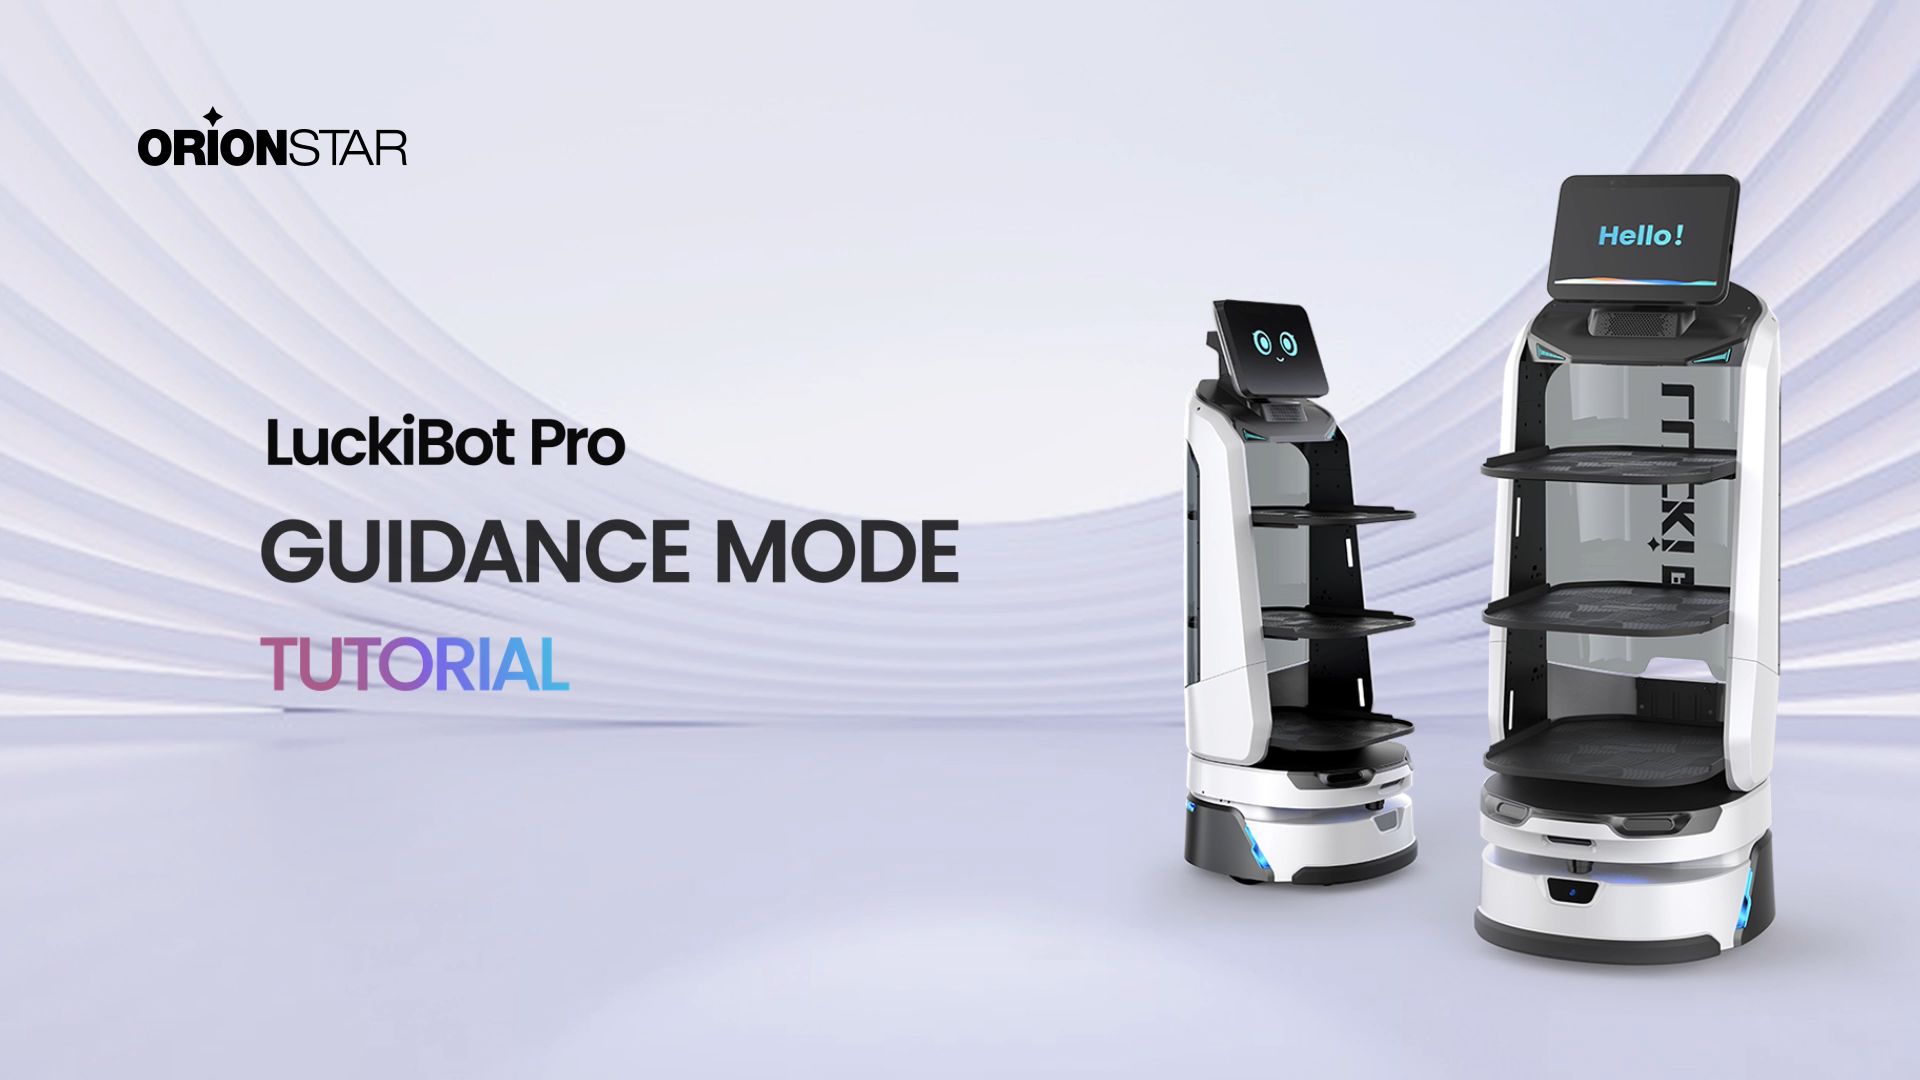 Discover the Guidance Mode Tutorial for LuckiBot Pro.